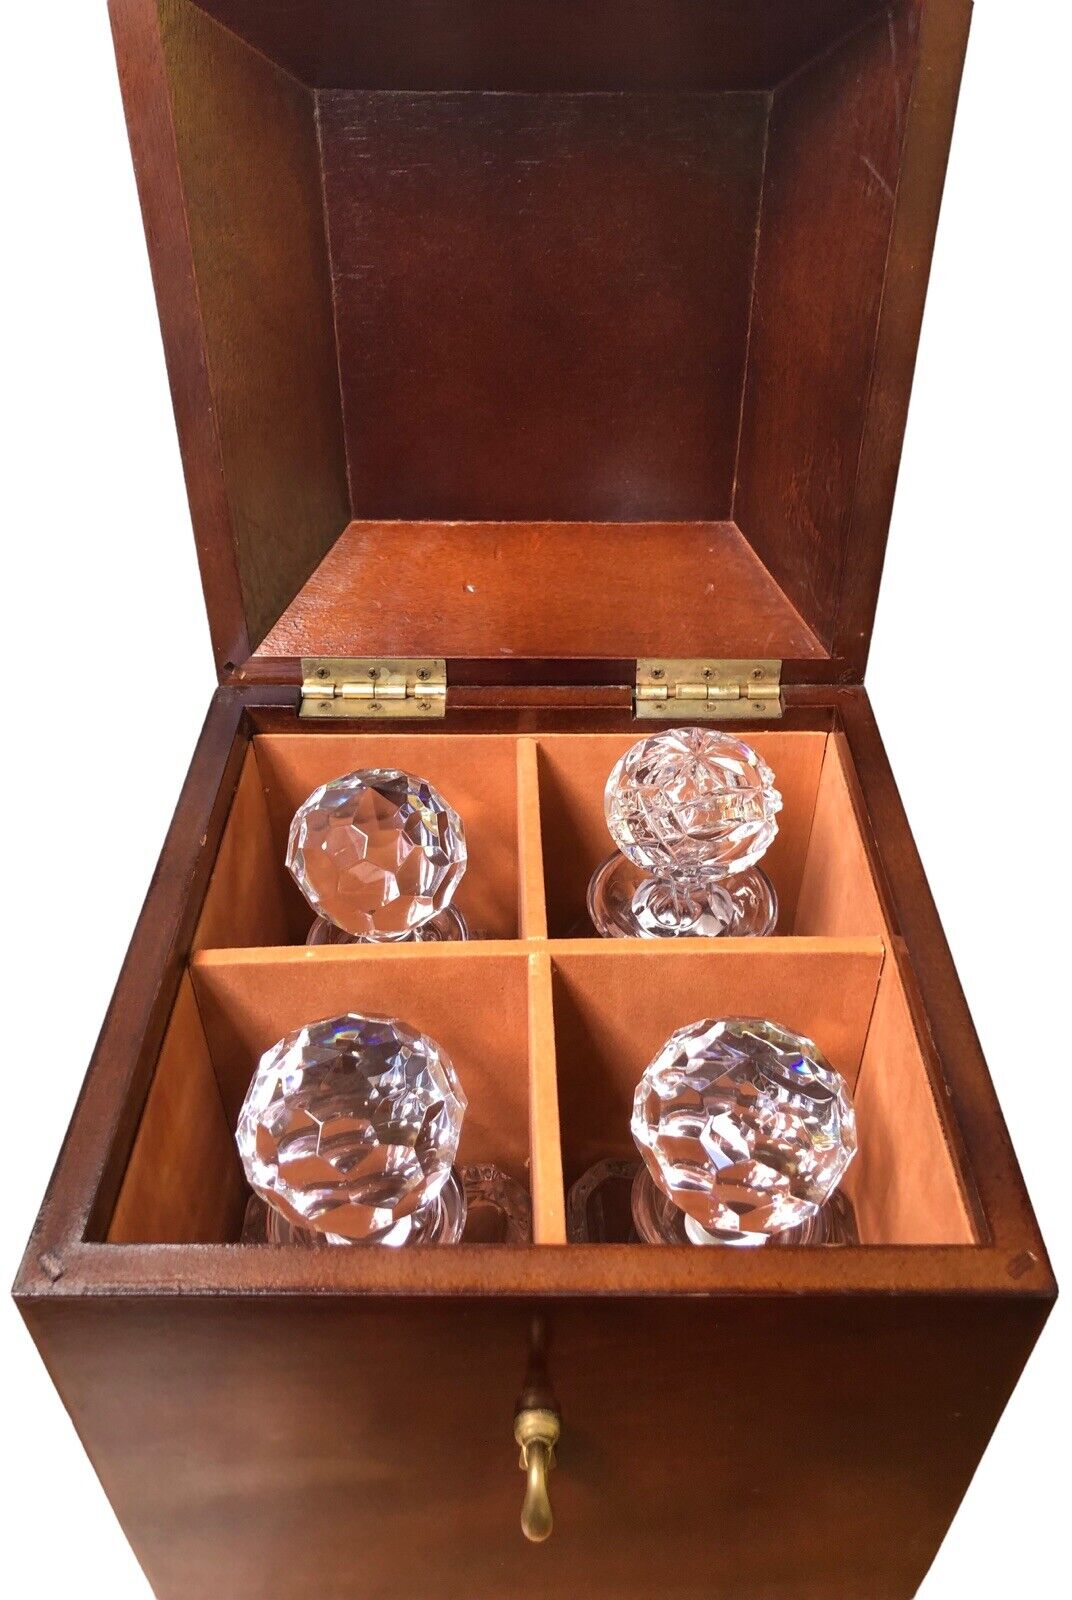 BOMBAY COMPANY Mahogany Decanter Box w/4 Cut-Glass Crystal Decanters & Stoppers